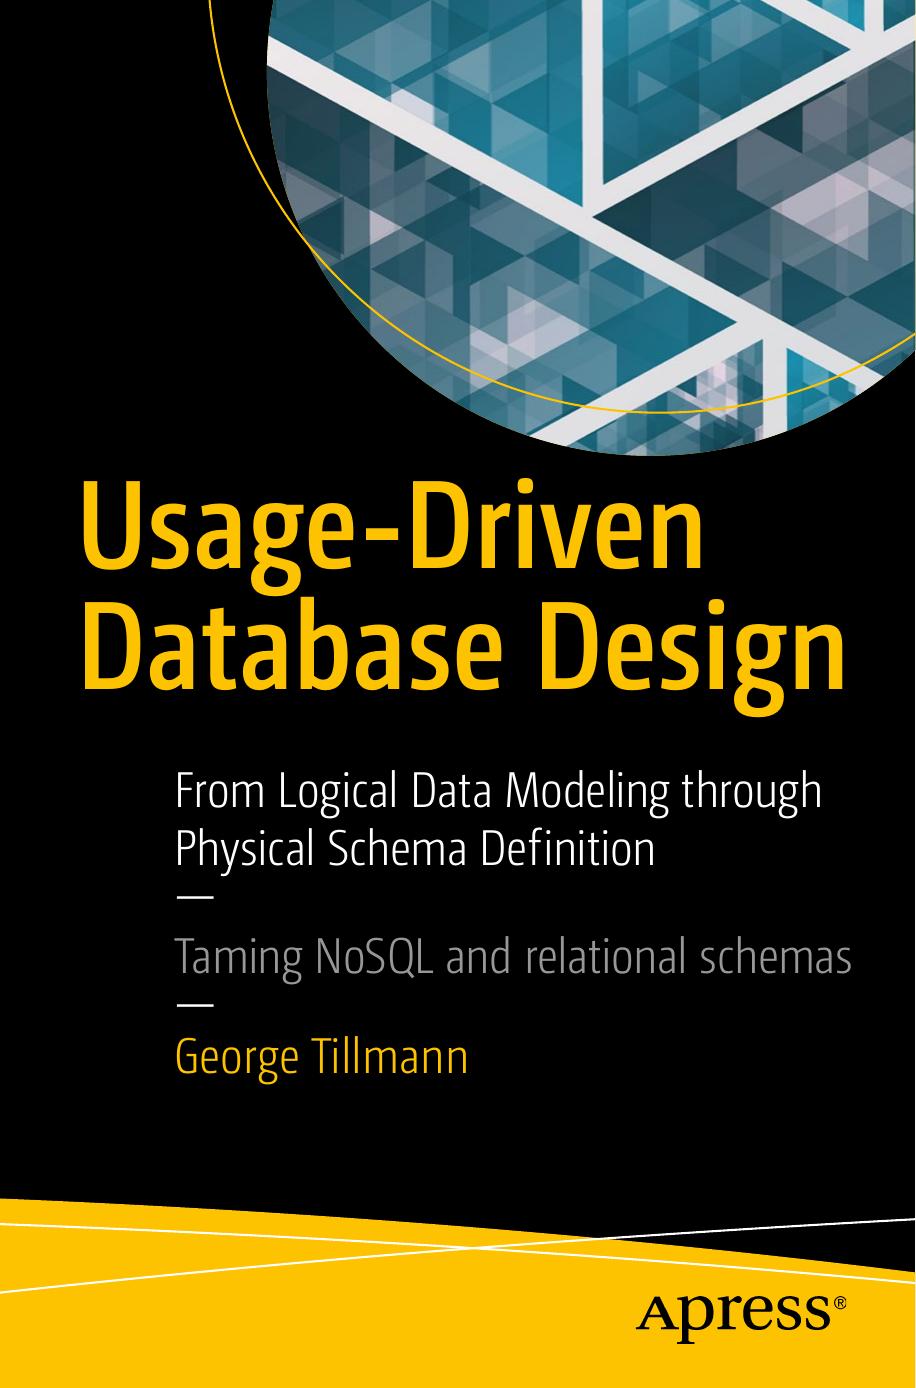 Usage-Driven Database Design  From Logical Data Modeling through Physical Schema Definition 2017